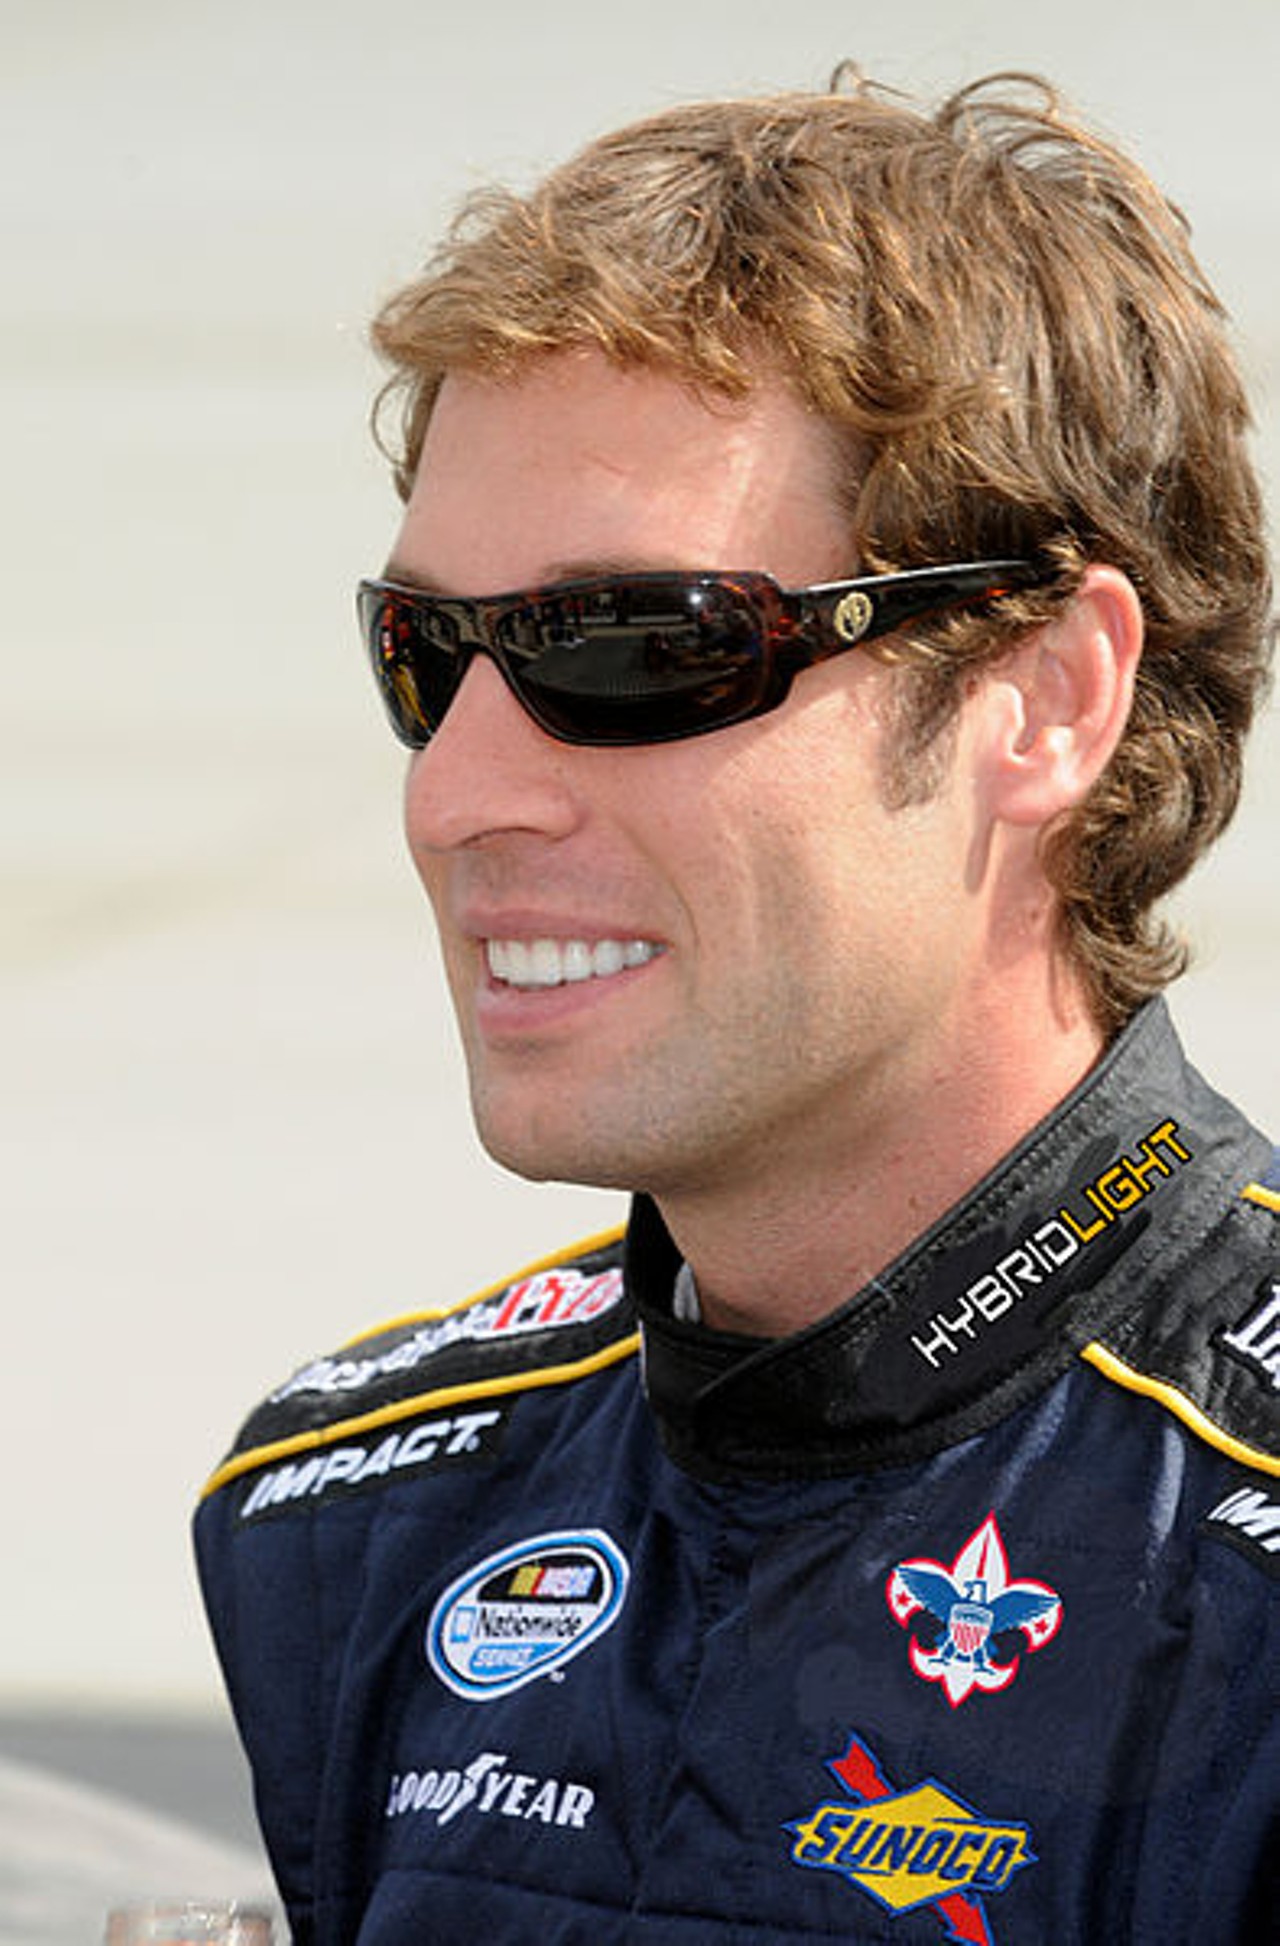 Scott Lagasse Jr.- A NASCAR driver currently in the Nationwide Series. He drives the number eight car.